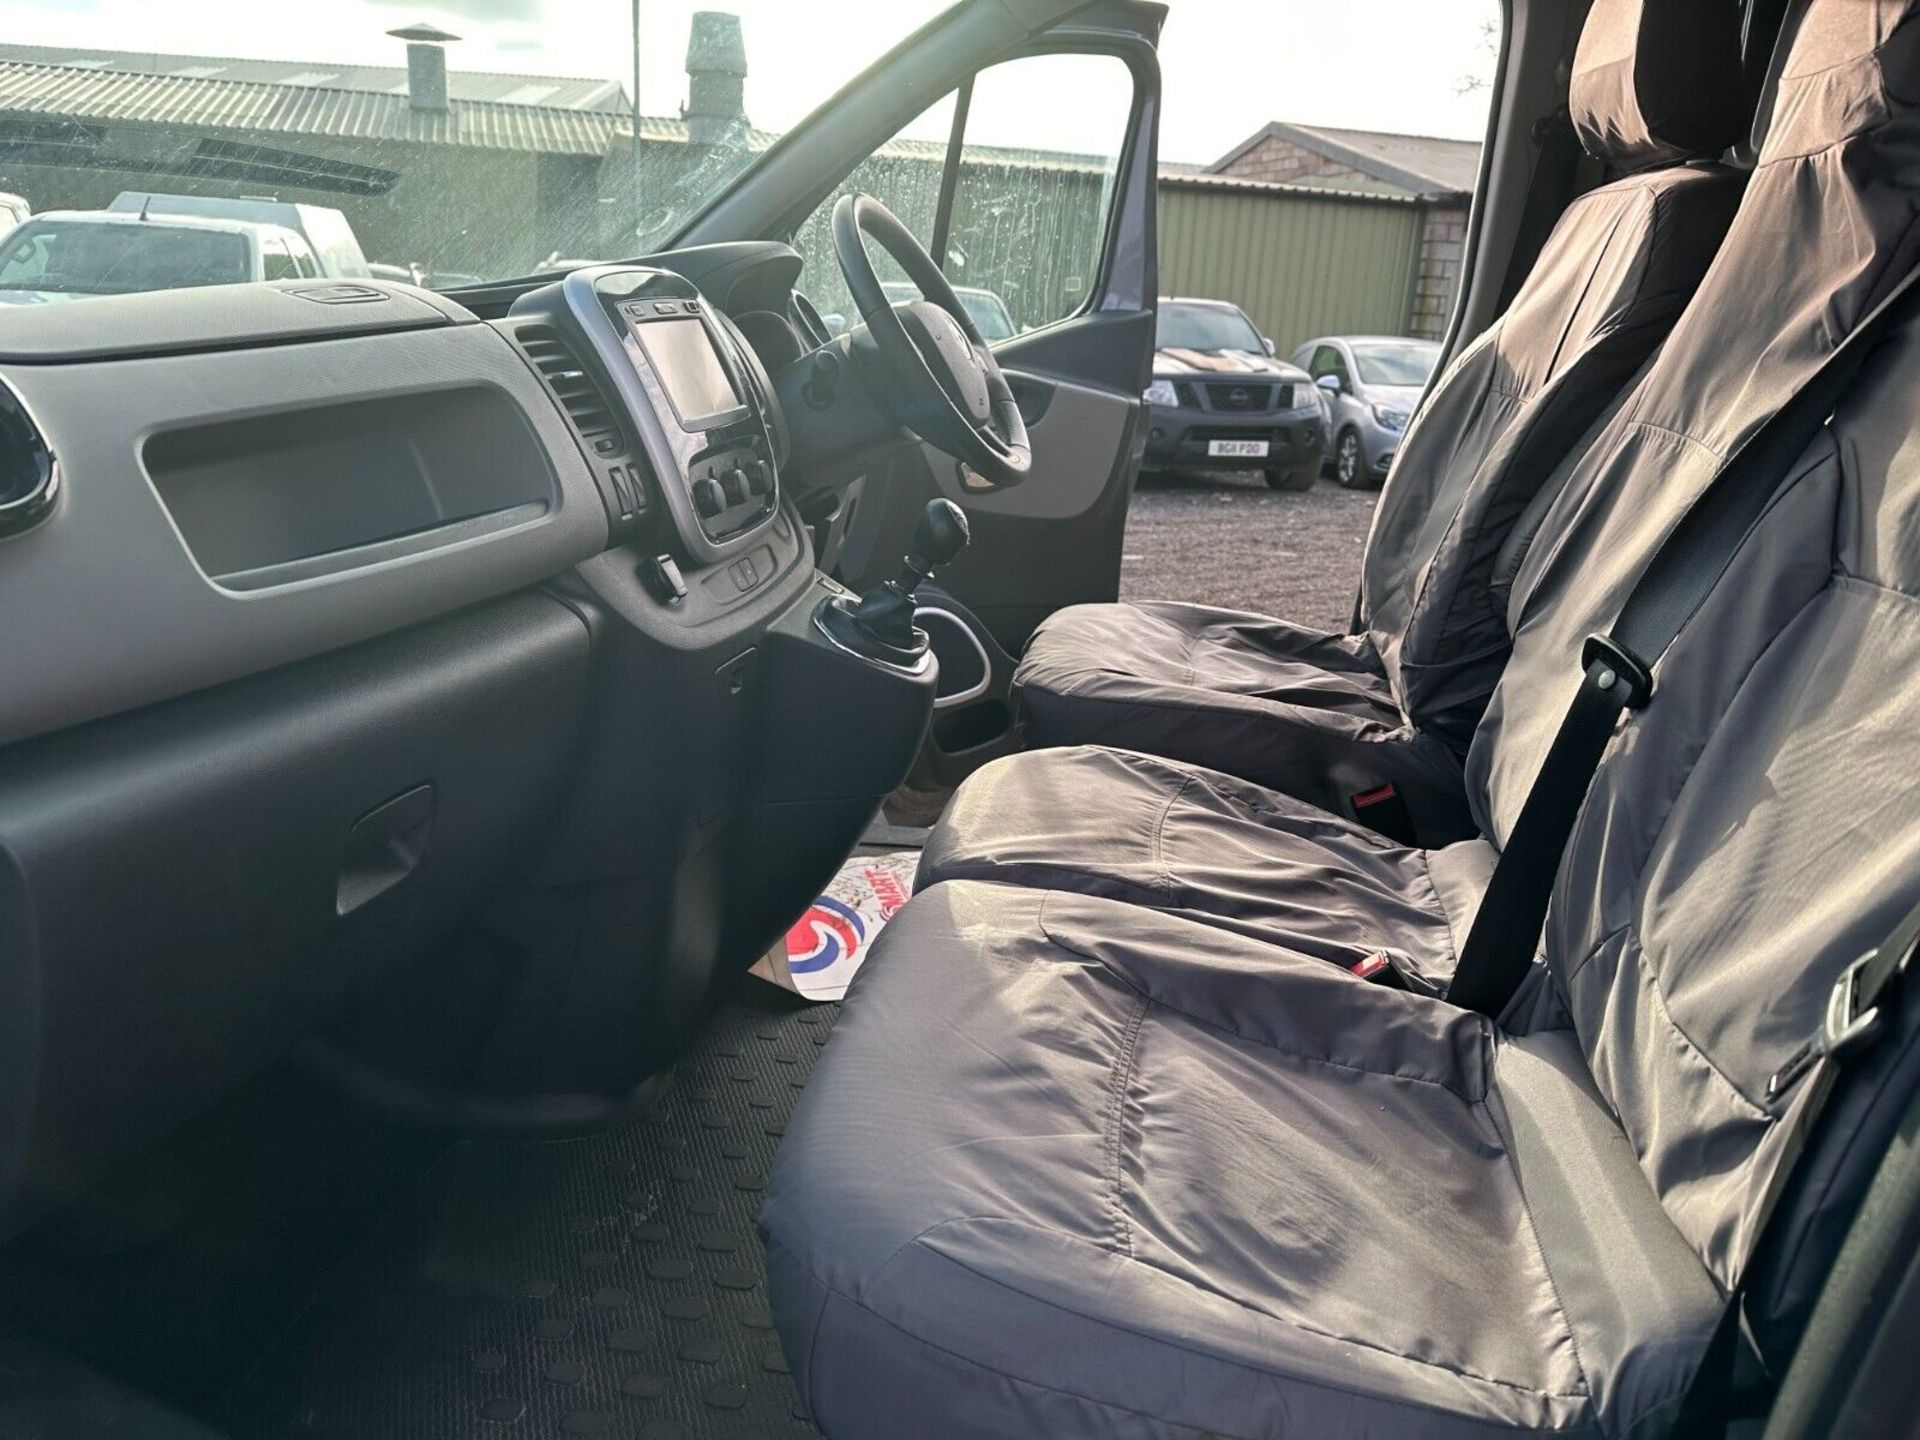 >>--NO VAT ON HAMMER--<< RENAULT TRAFIC REVIVAL: CLEAN BODY, INTERIOR - REPAIR OPPORTUNITY - Image 4 of 16